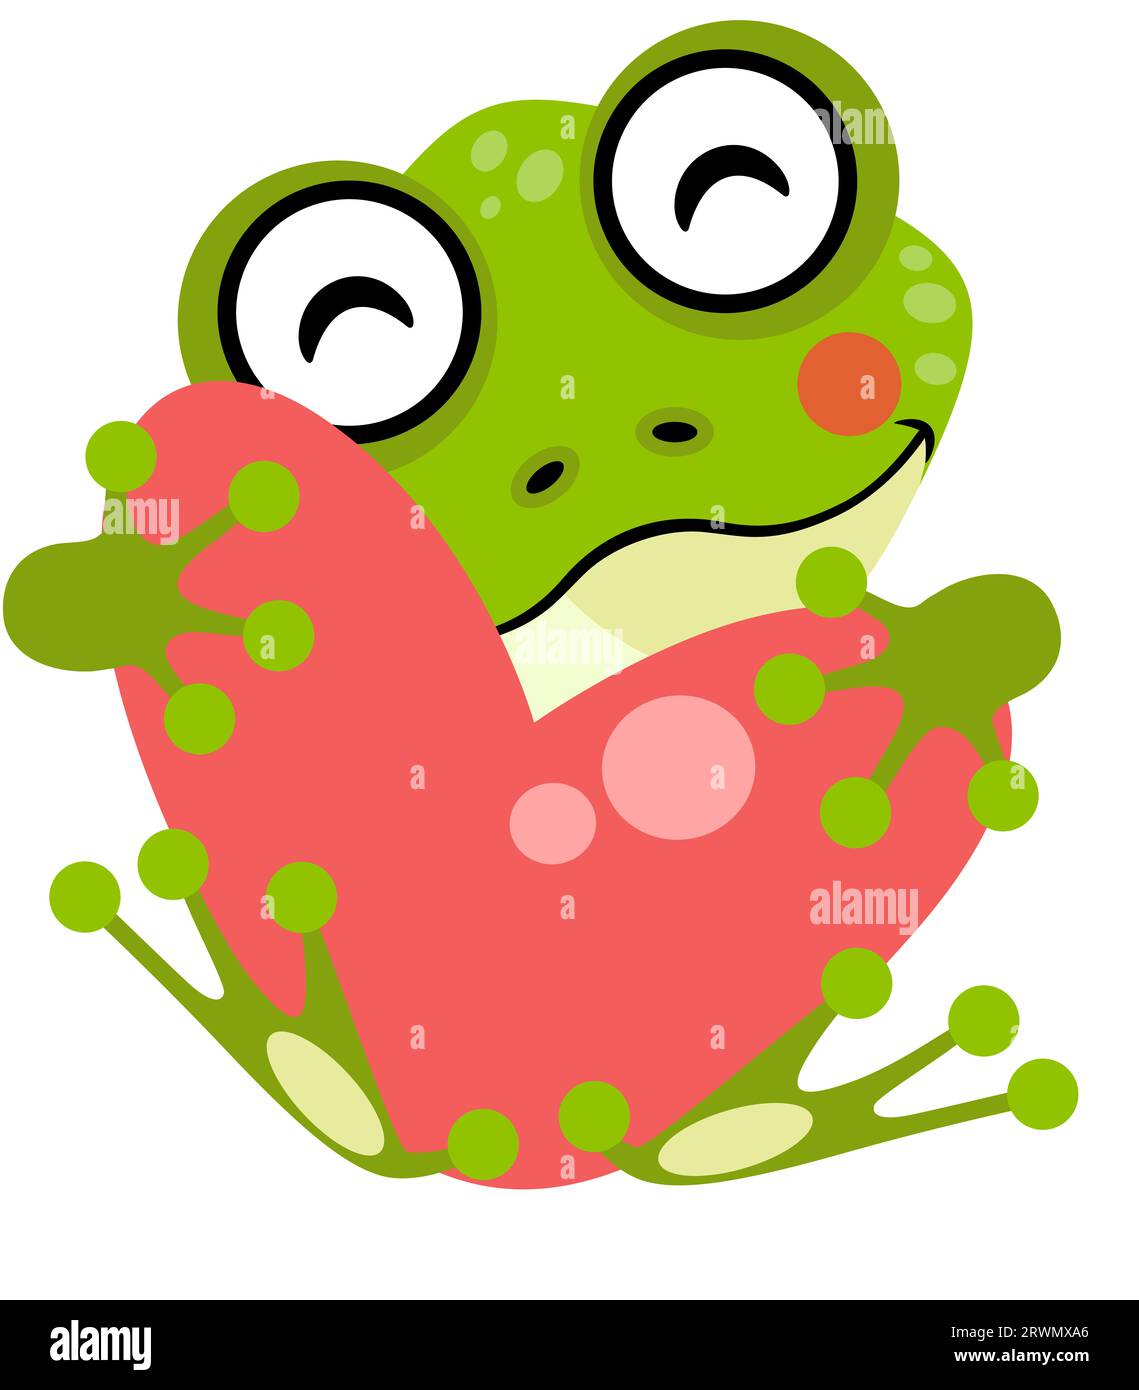 Cute frog sitting holding a big heart Stock Photo